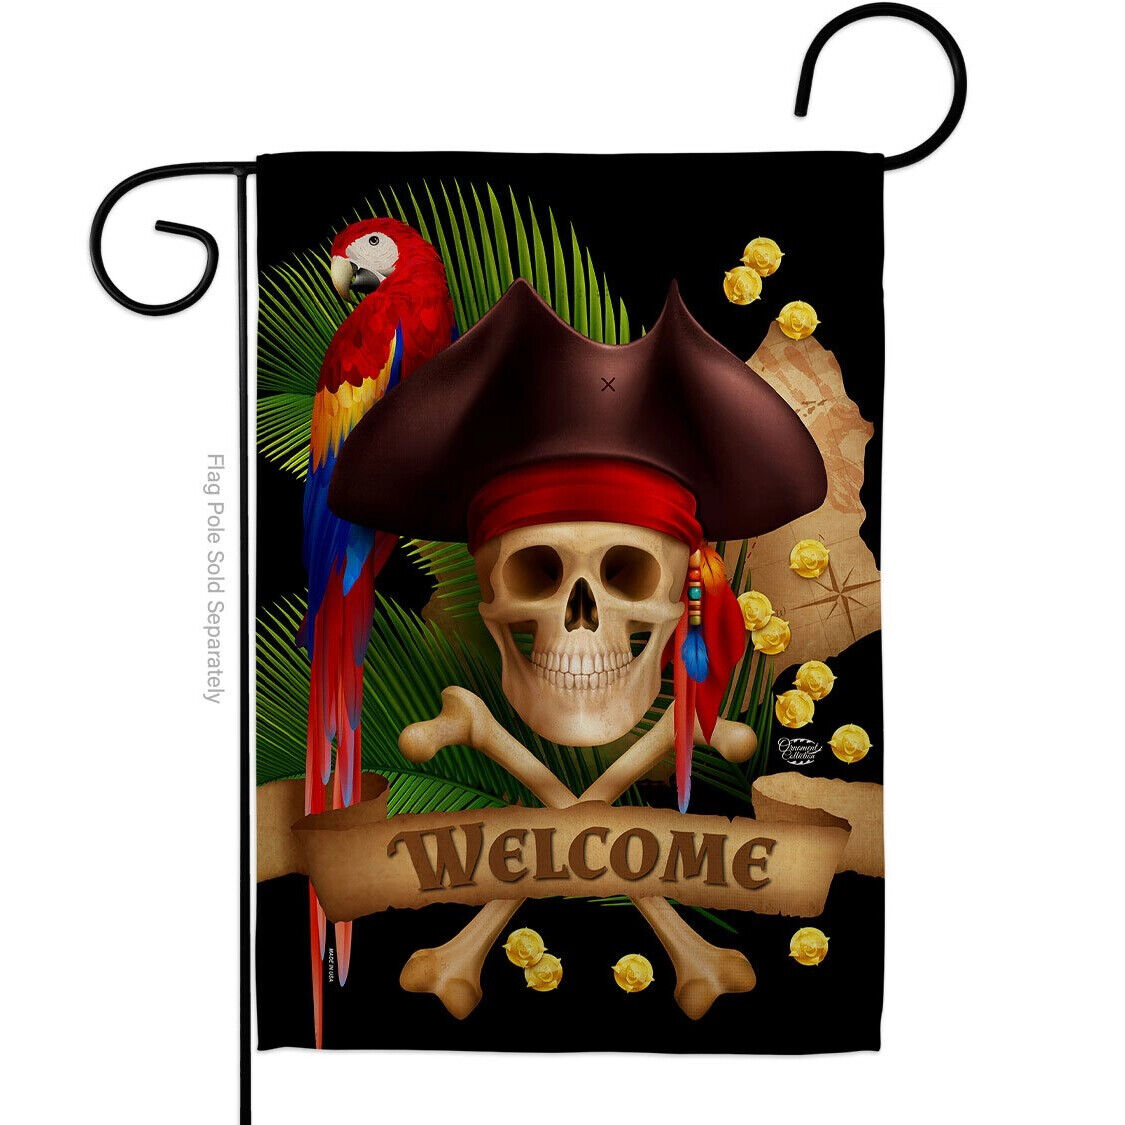 Two Group Don't miss the campaign Flag Pirate Ahoy w Coastal San Jose Mall Decor Bird Mate